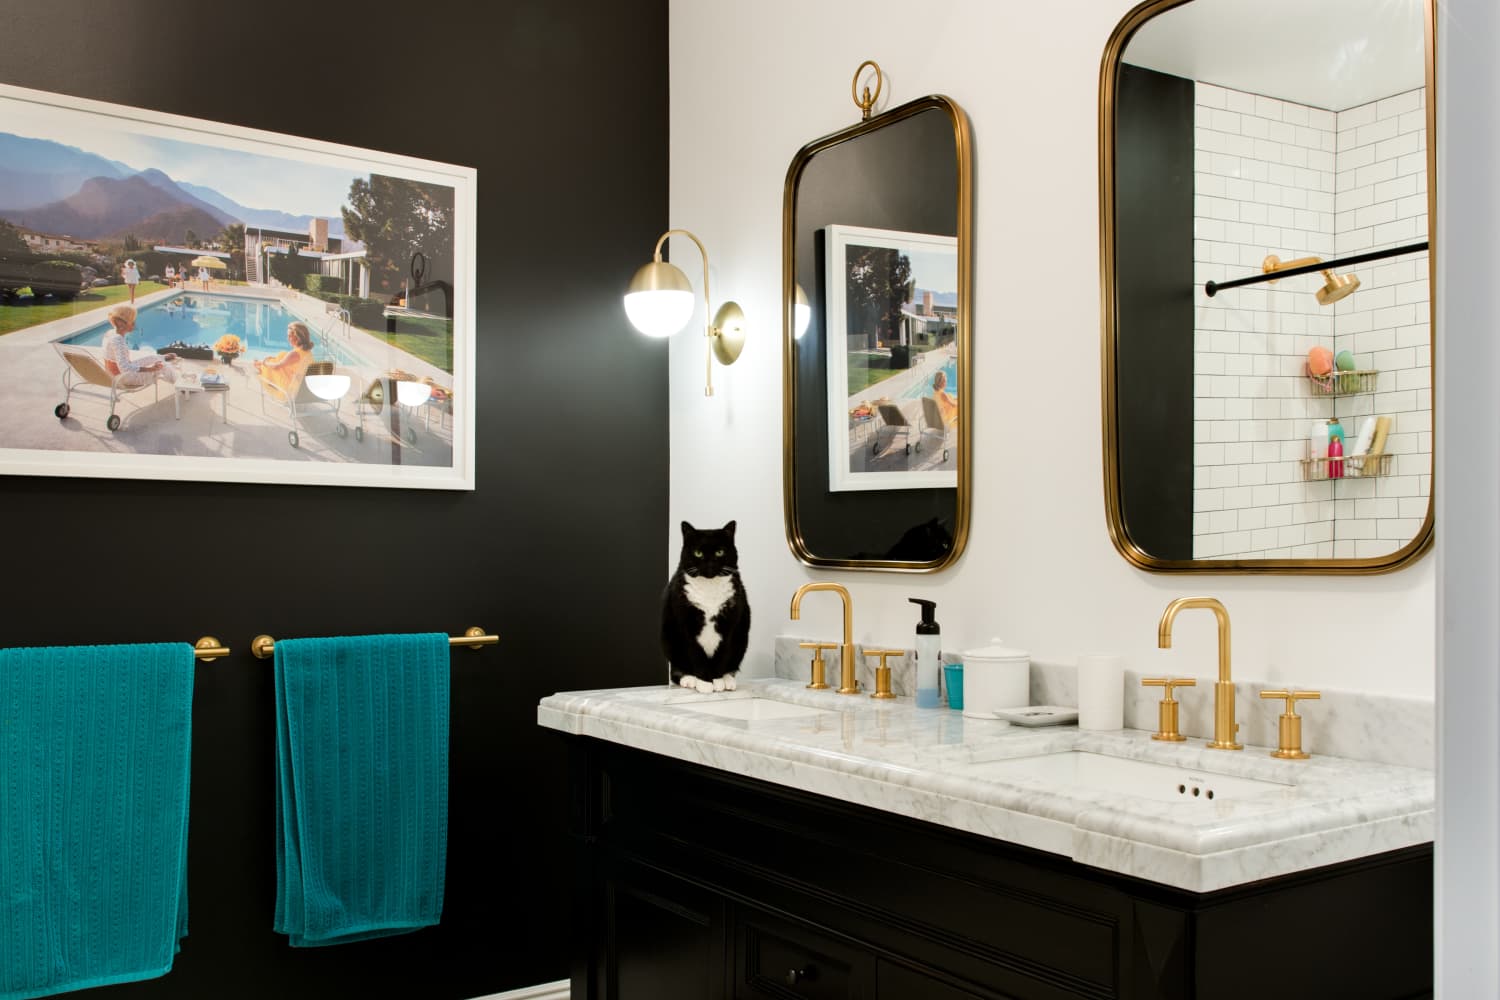 30 Popular Bathroom Paint Color Ideas for a Perfect Finish